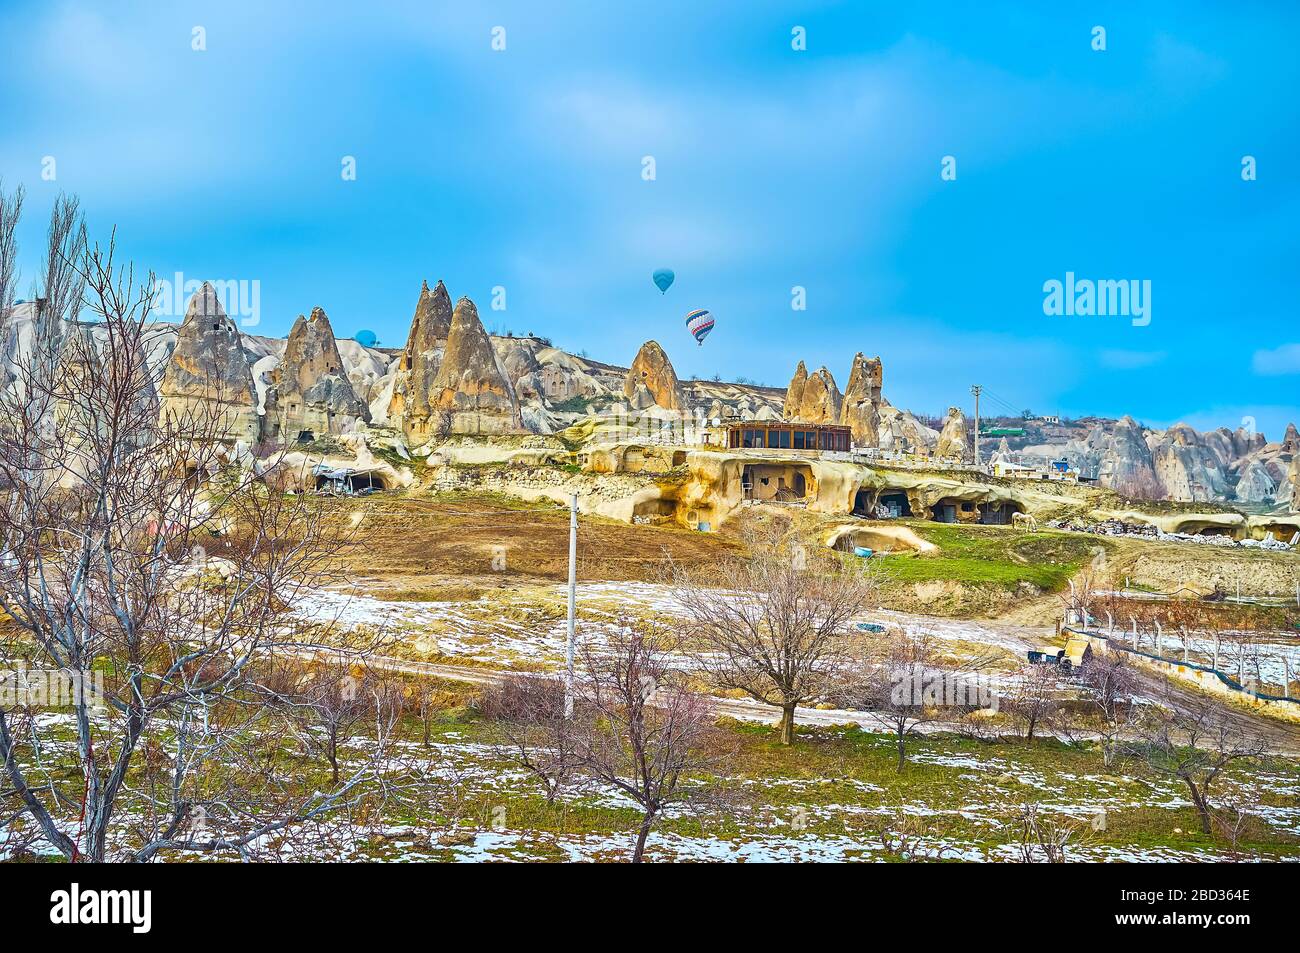 Watch the rocky landscape of Goreme with fairy chimney formations and hot air balloons in the sky, Cappadocia, Turkey Stock Photo